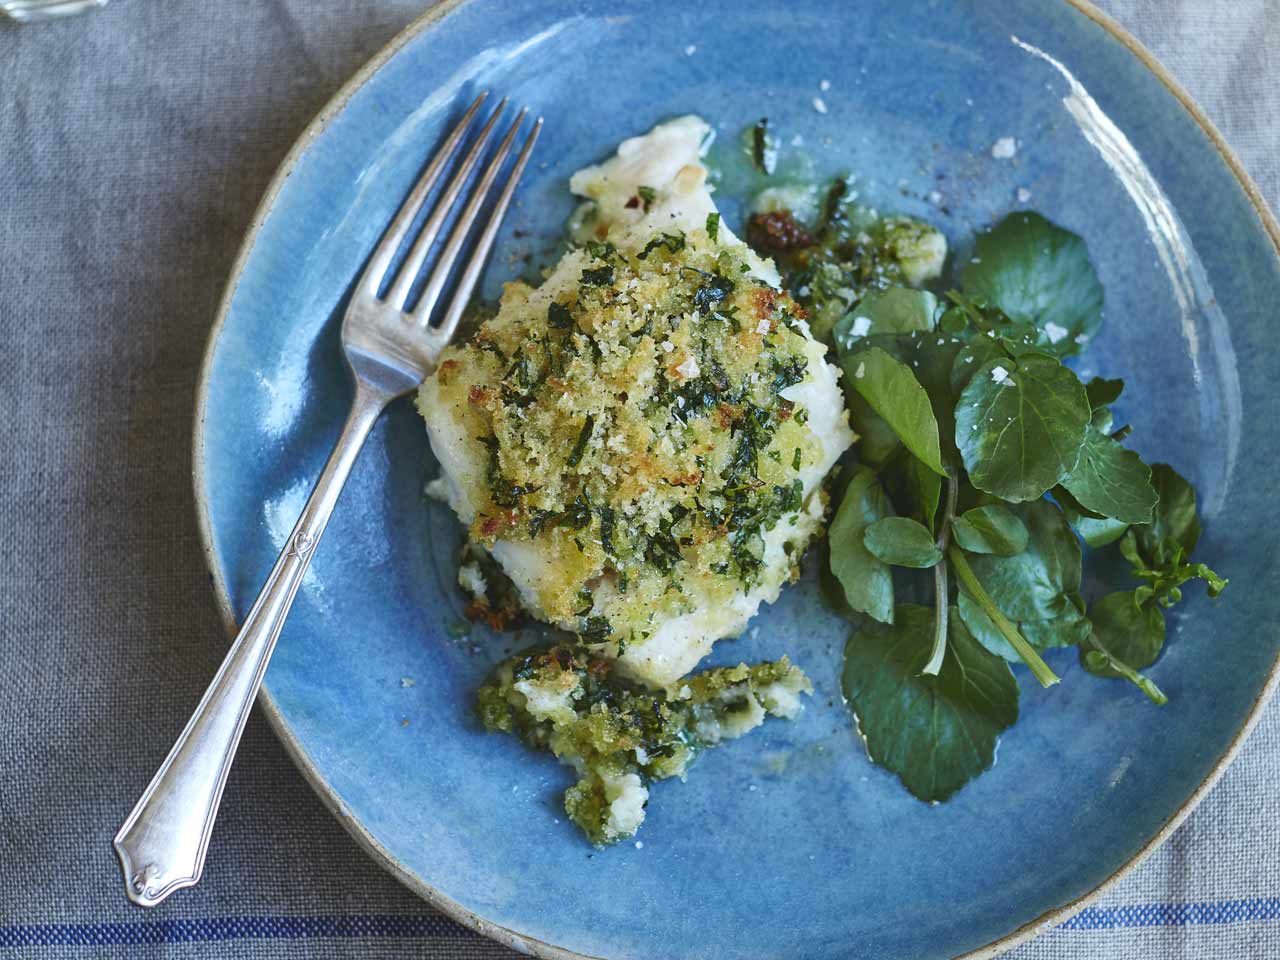 Baked cod with a herb and cheddar crust